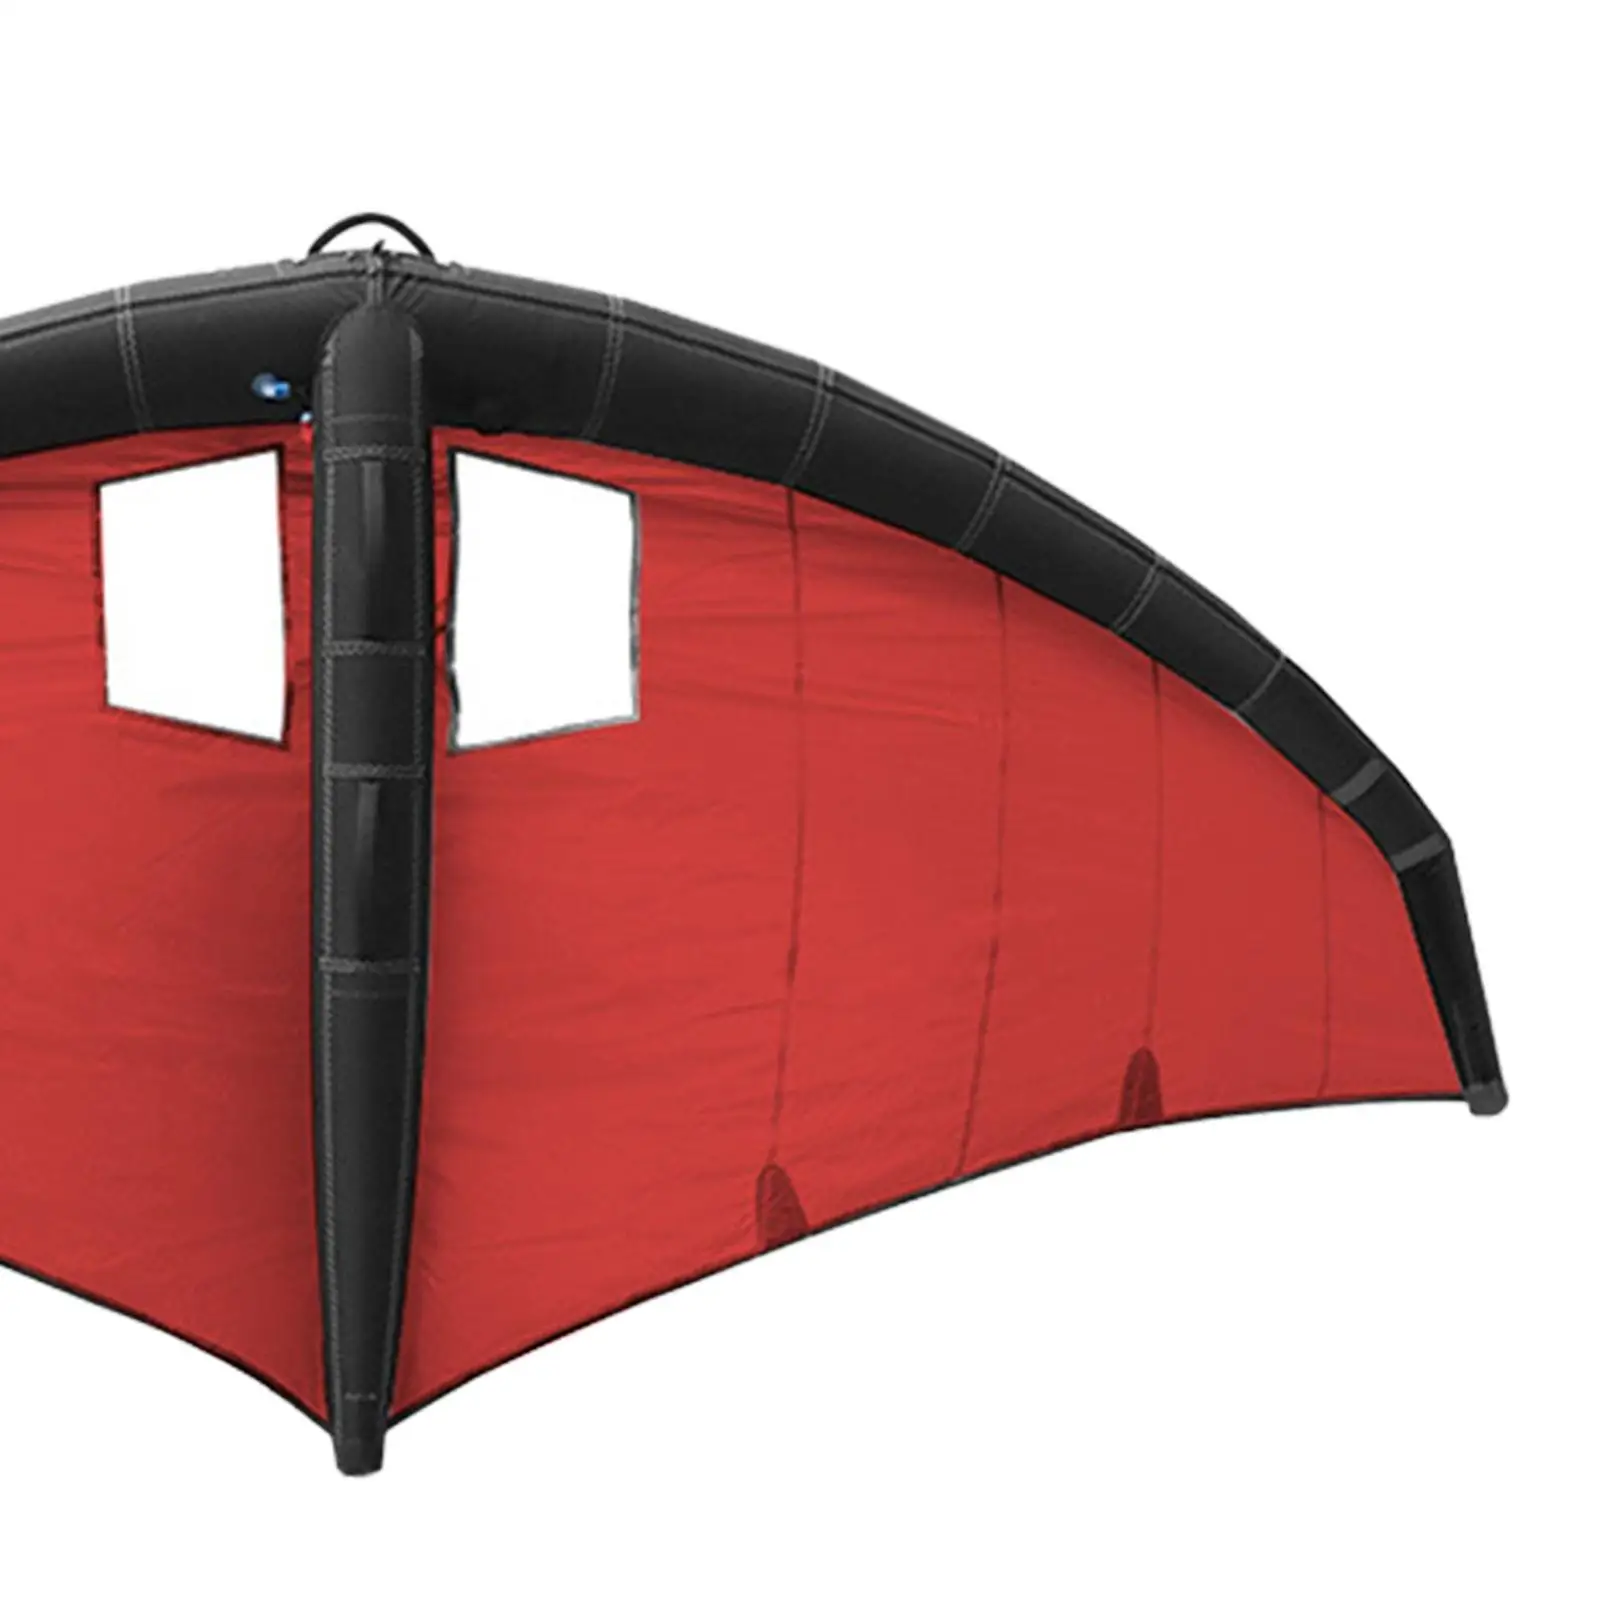 Inflatable Surfing Wing Inflatable Kite for Kitesurfing Surfing Windsurfing